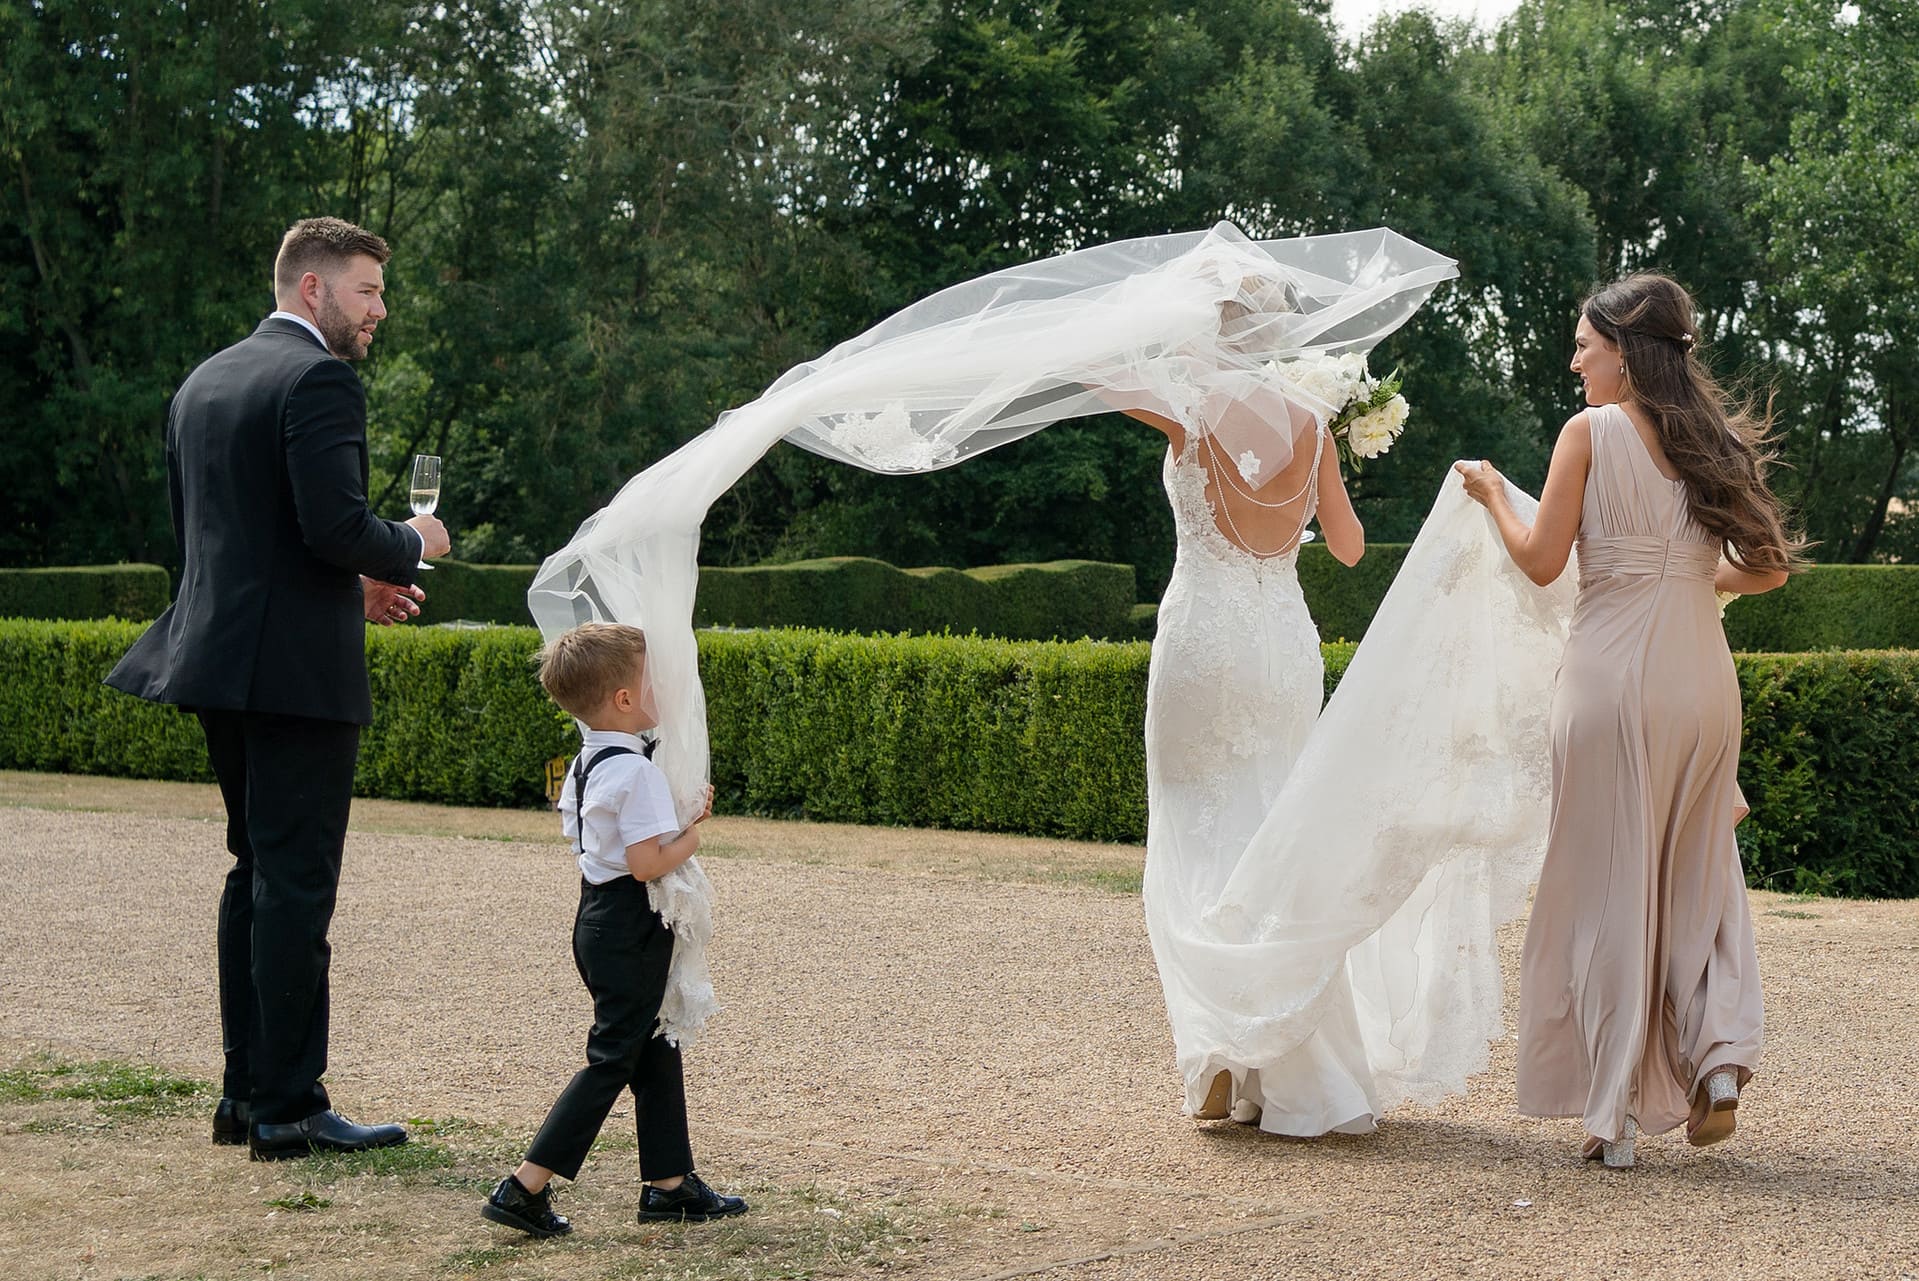 Pageboy getting covered in bride's veil as it blows in the wind